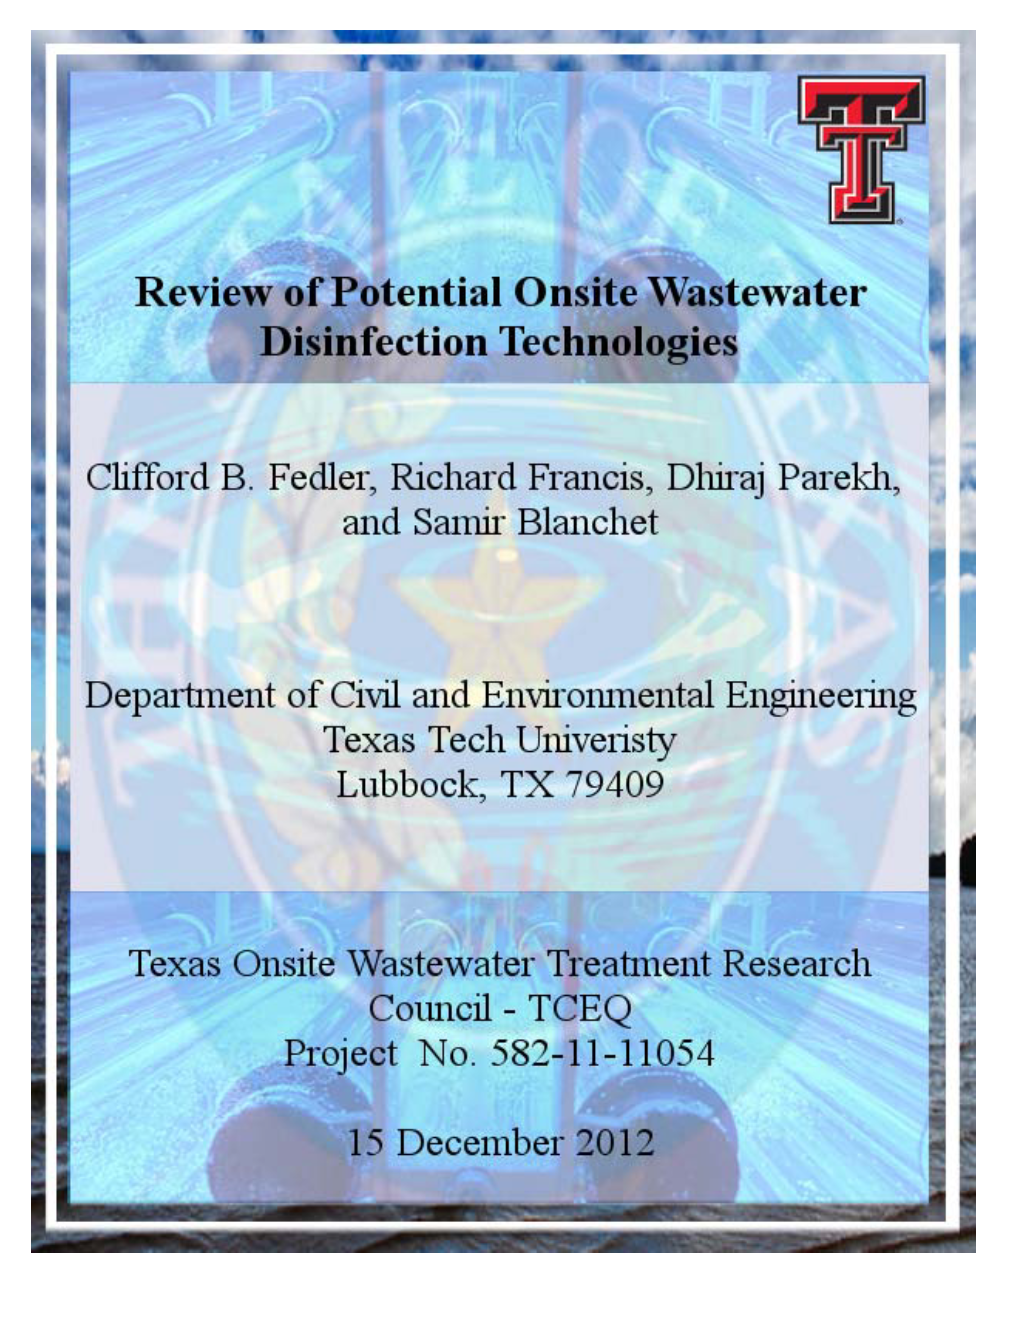 Review of Potential Onsite Wastewater Disinfection Technologies